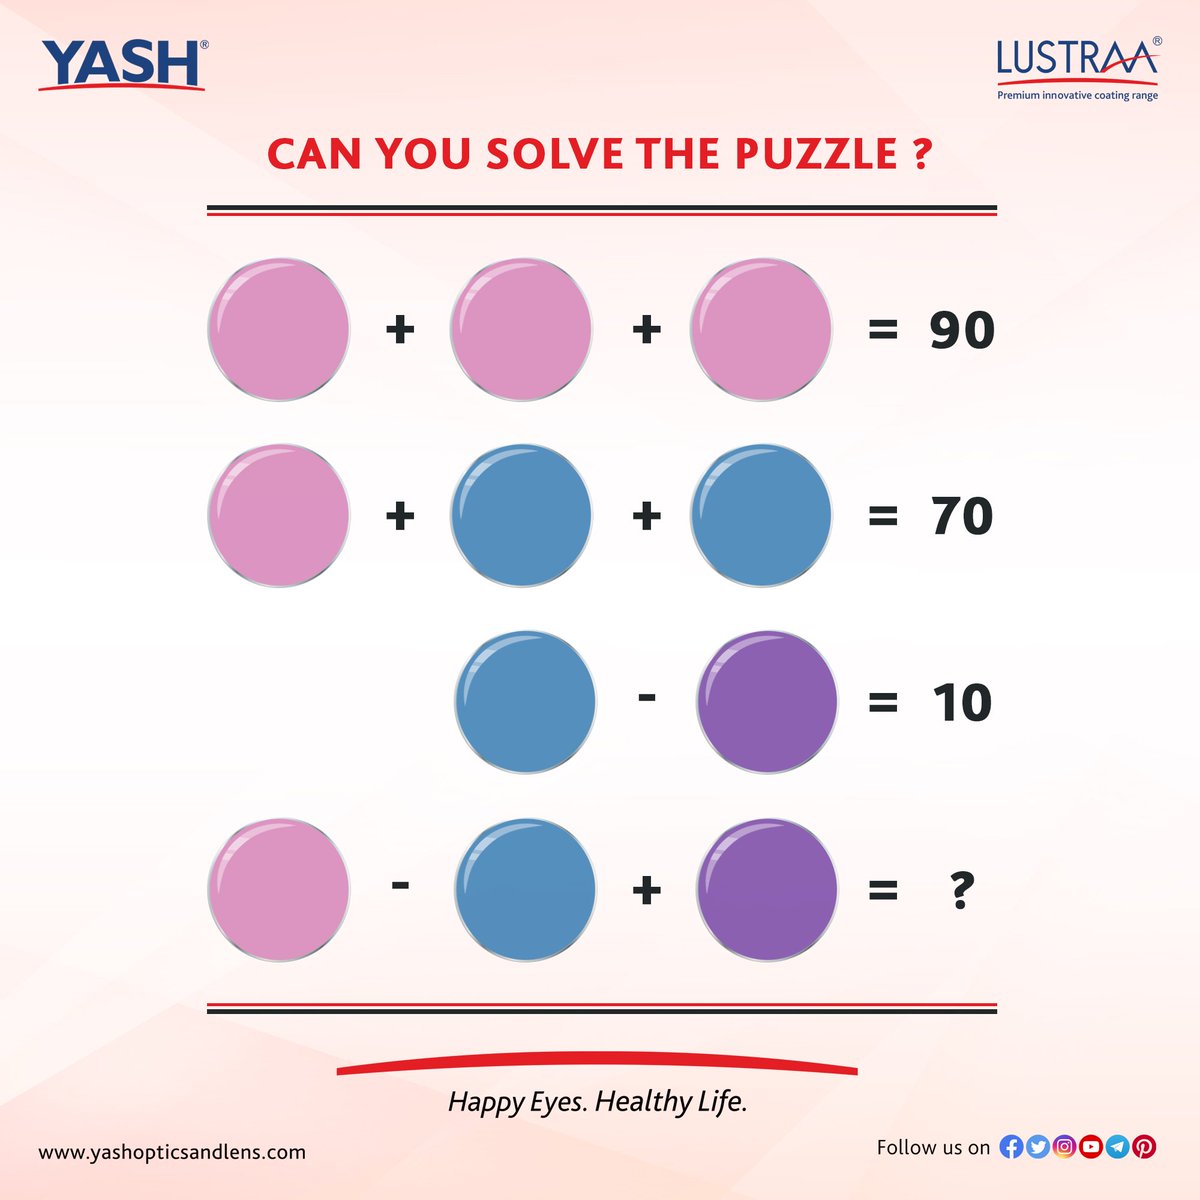 Prepare your #eyes for yet another exciting #PuzzleChallenge

What's the right answer? Comment and let us know!

#Puzzle #Puzzles #PuzzleVision #PuzzleADay #EyeHealth #EyeCare #EyeSight #EyeCareSpecialists #EyeProblems #Eyes #CareForEyes #LustraaCoatings #YashOpticsandLens